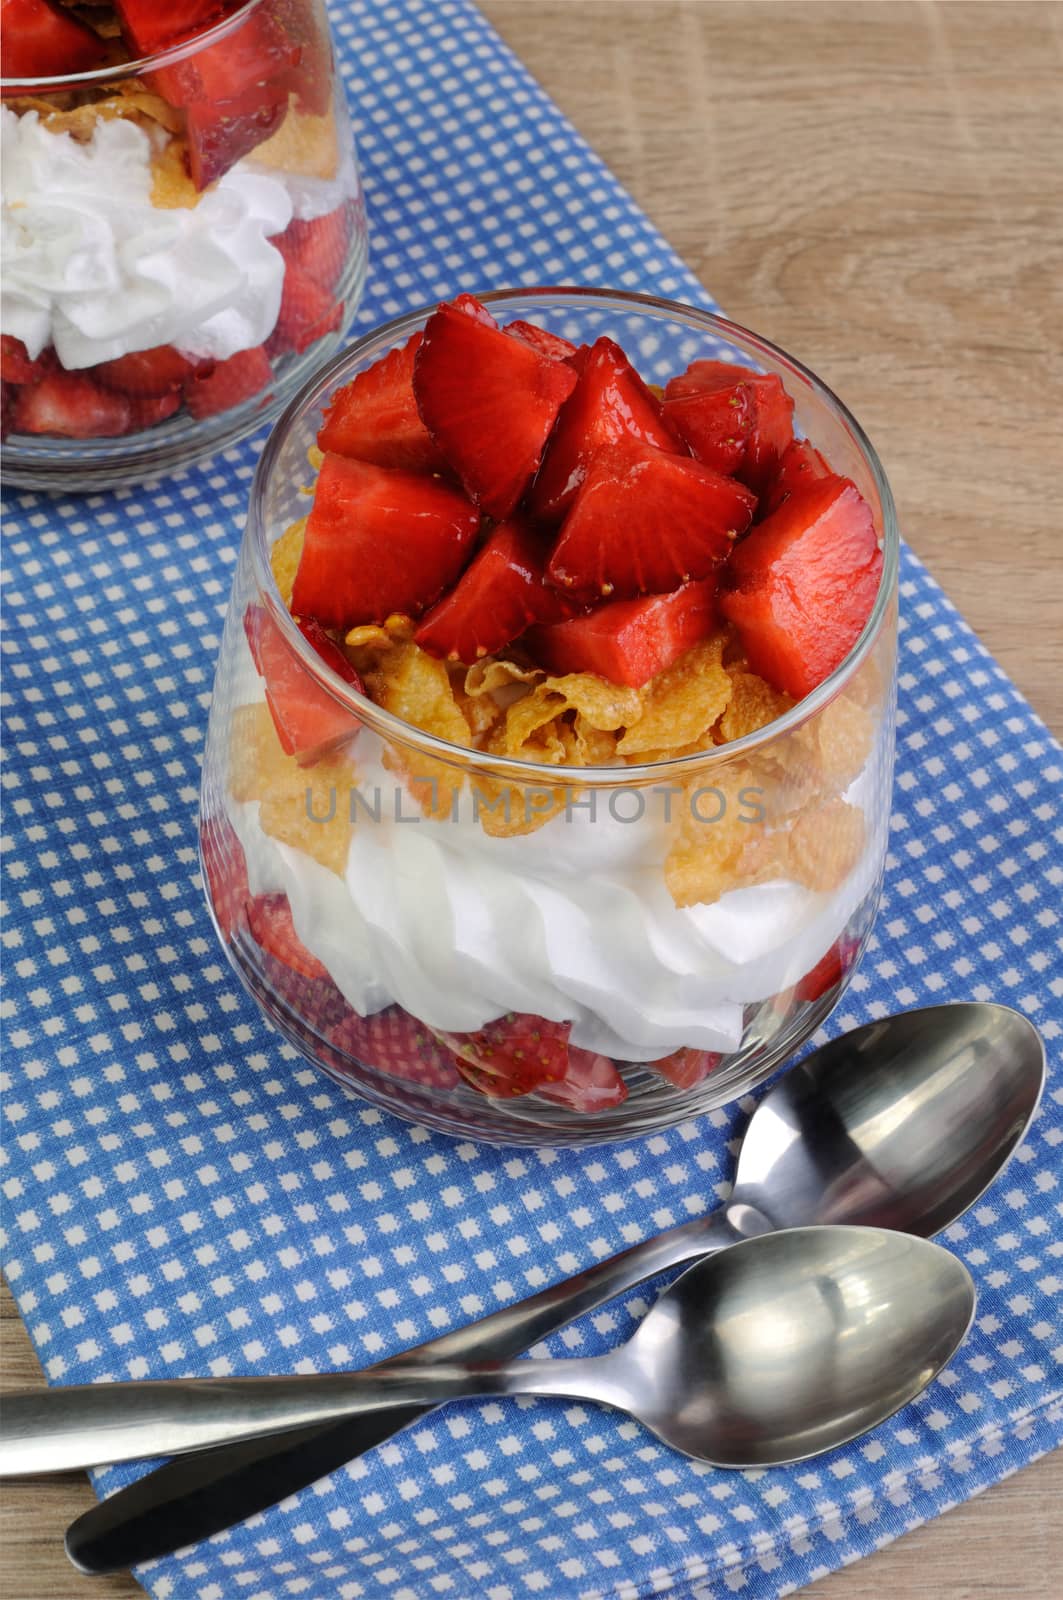 Dessert of strawberries with whipped cream and corn flakes